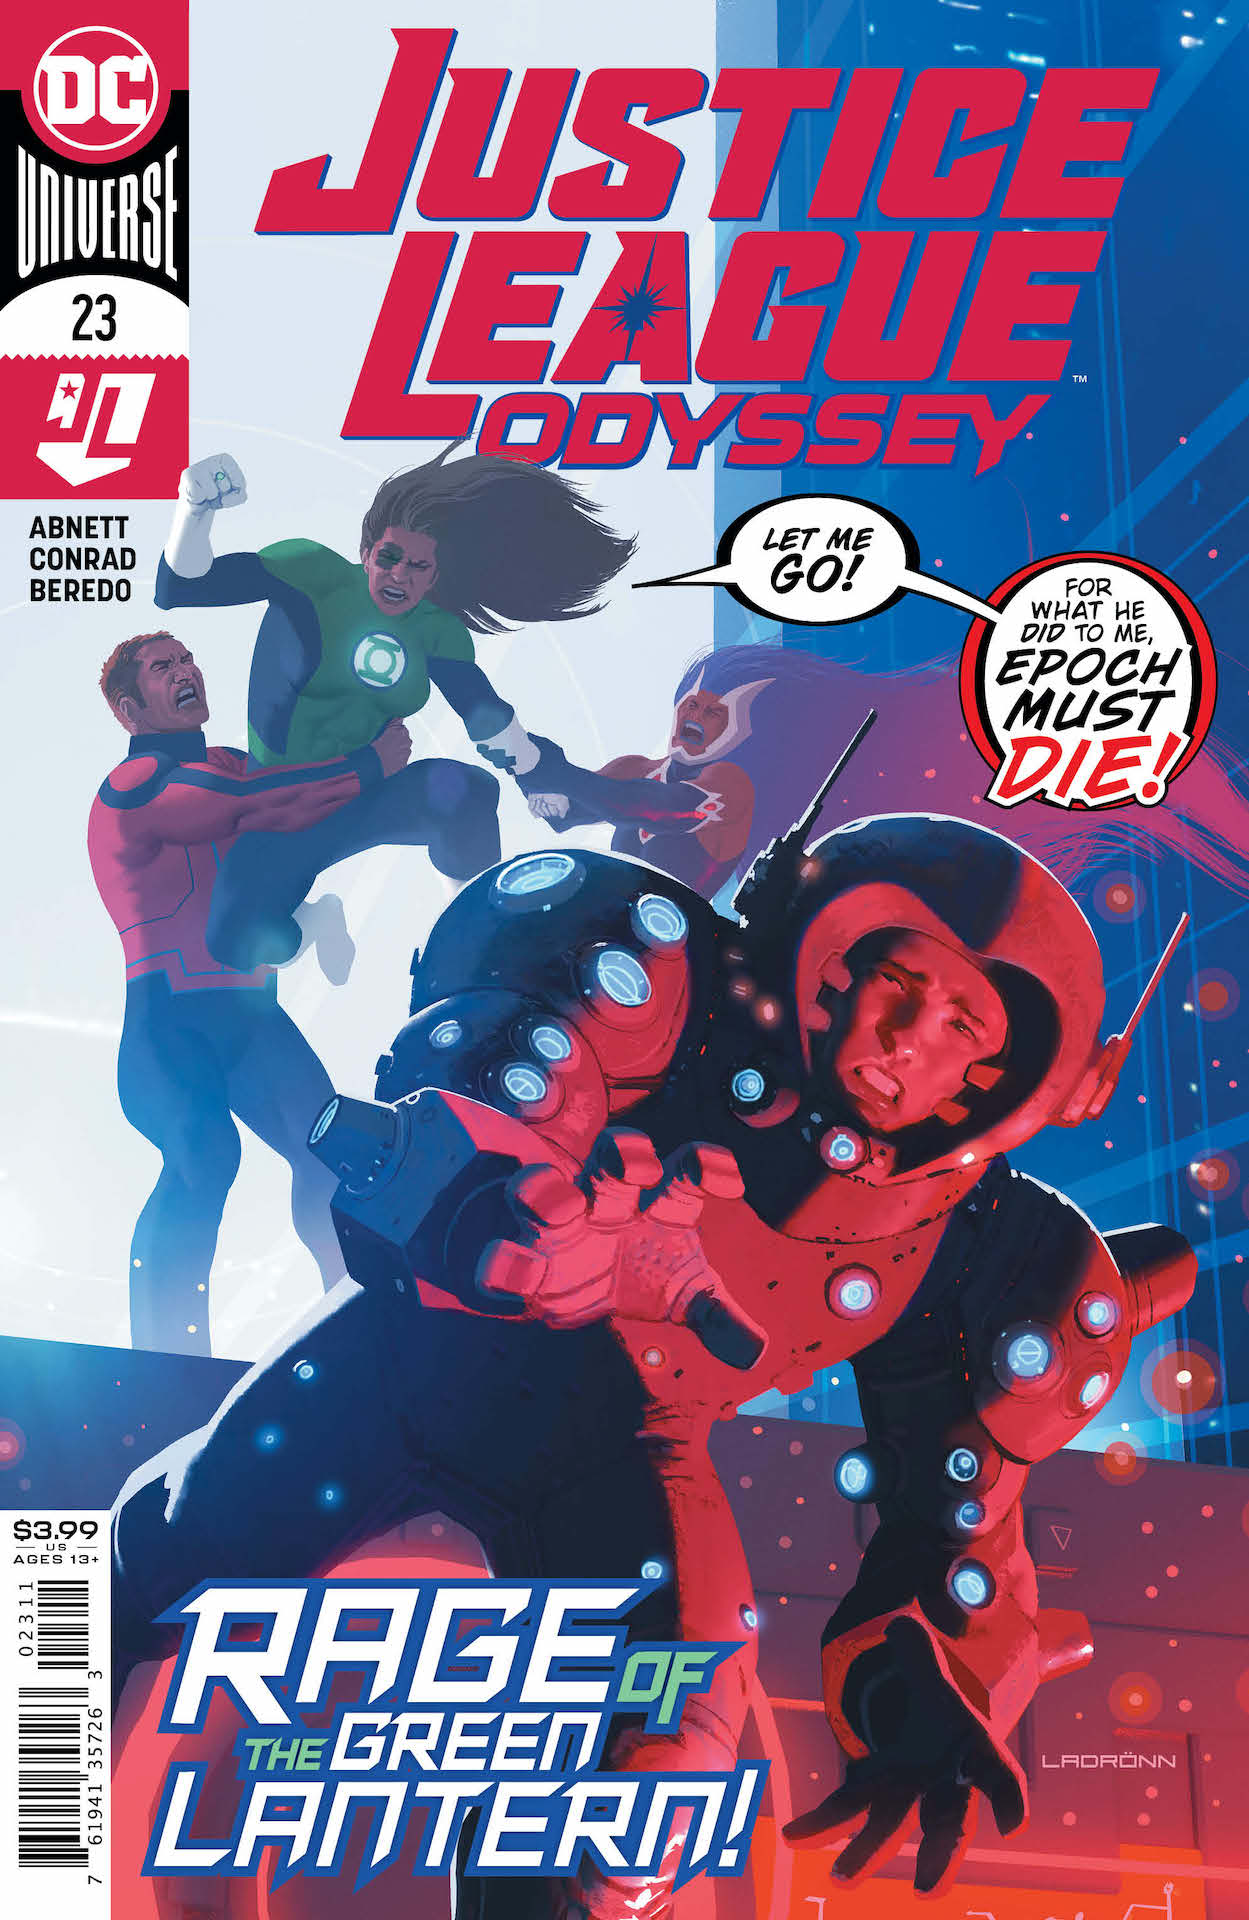 DC Preview: Justice League Odyssey #23